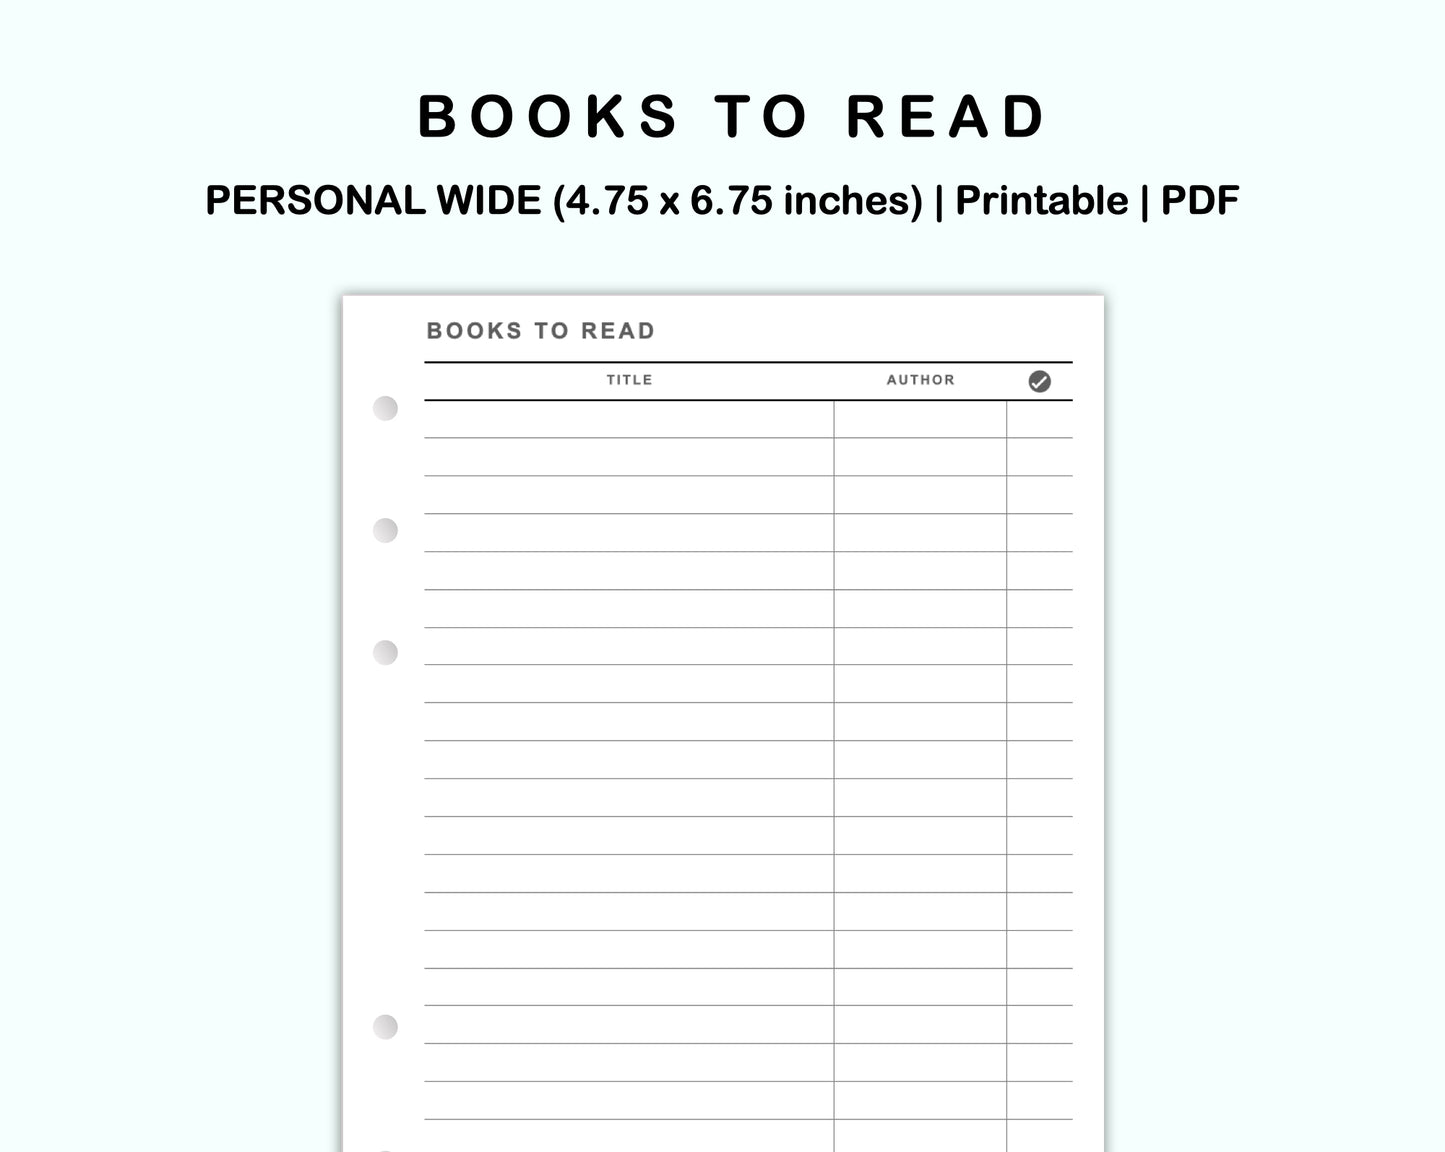 Personal Wide Inserts - Books to read